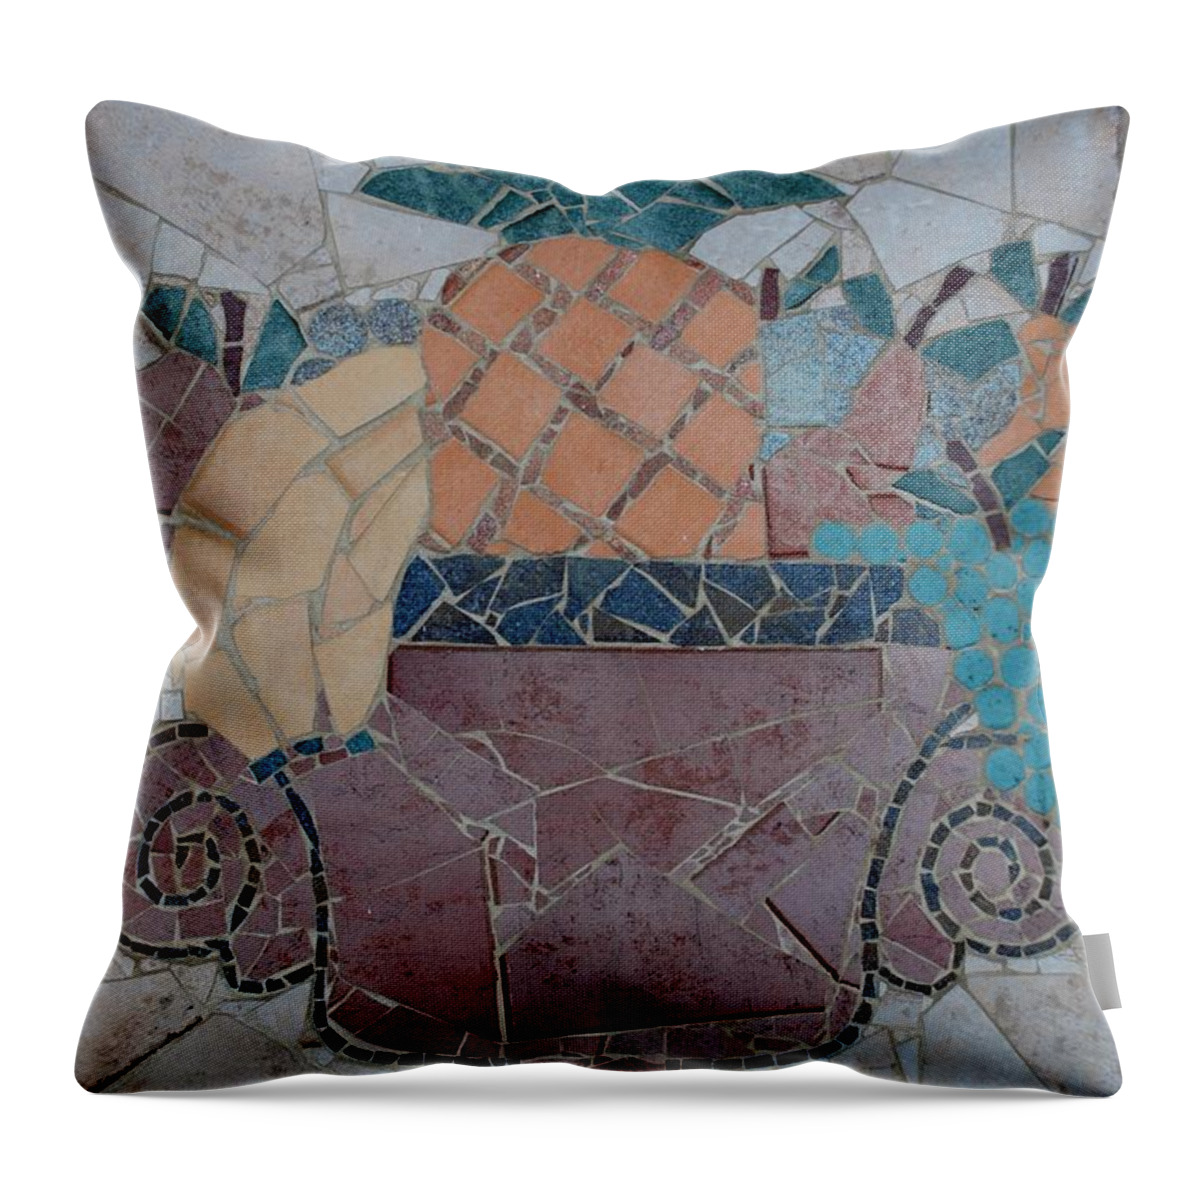 Fruit Throw Pillow featuring the photograph Tiled Fruit #1 by Rob Hans